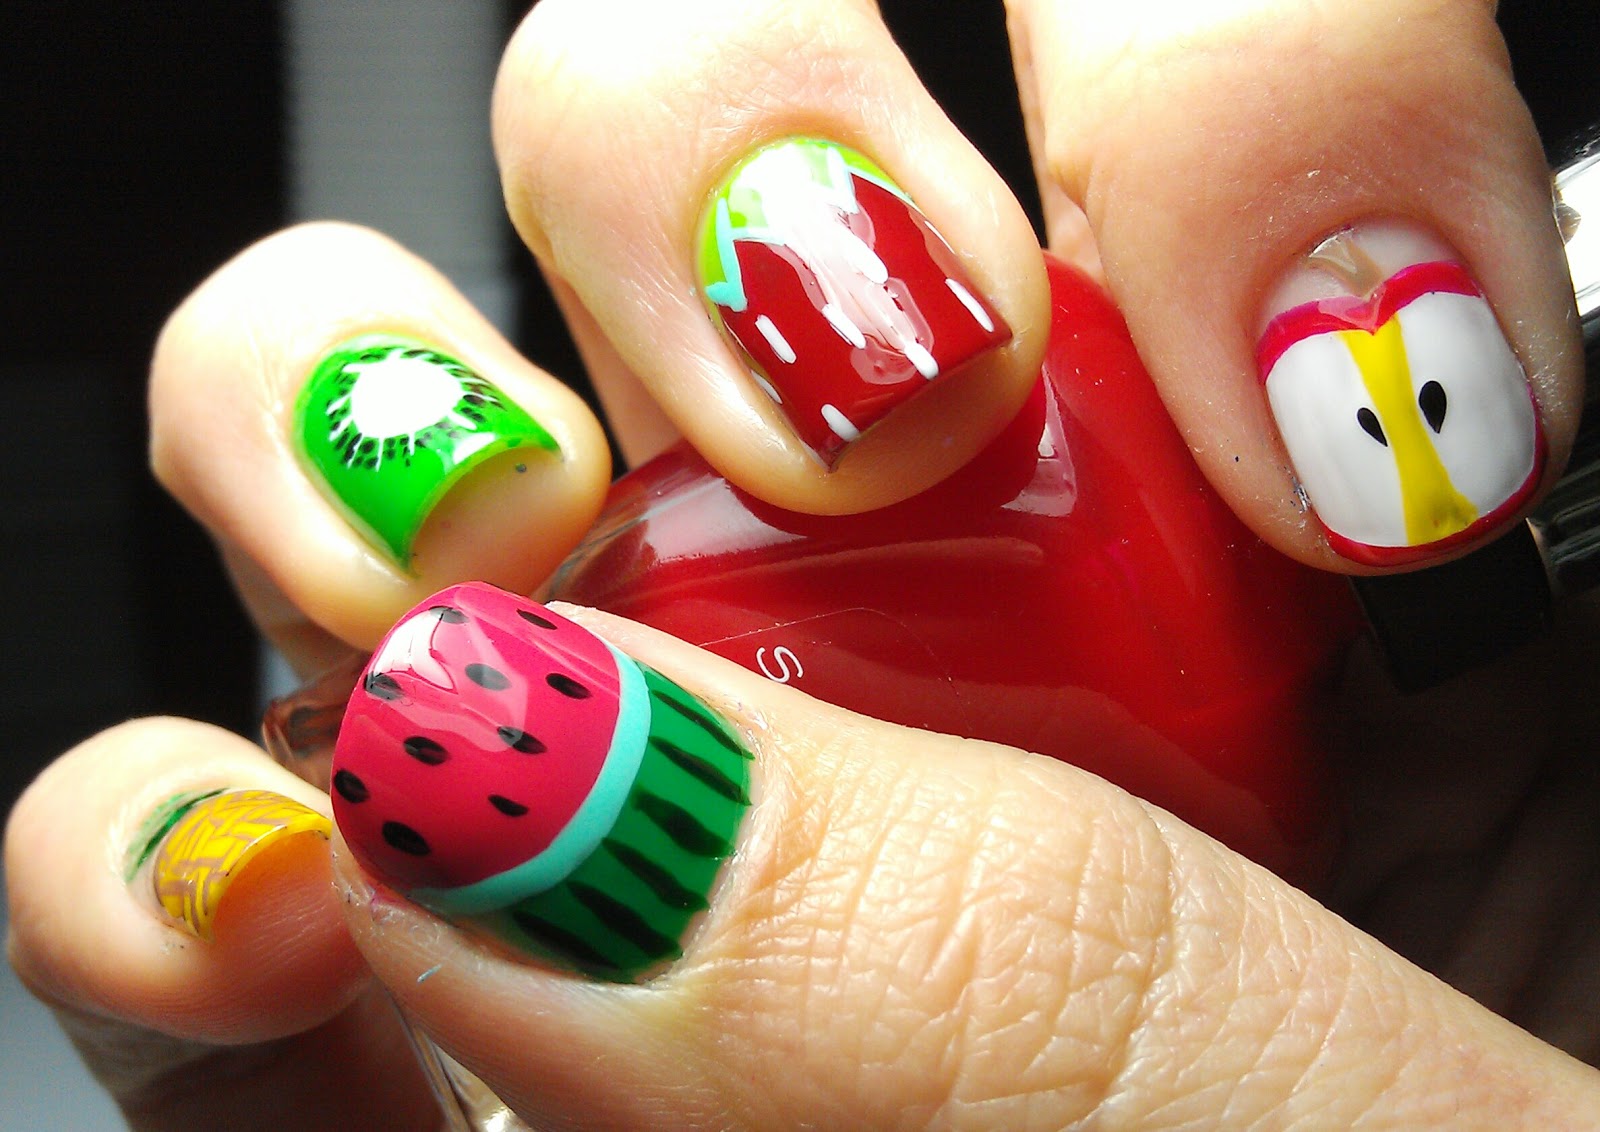 10. "Fruit Smoothie" Nail Art - wide 2